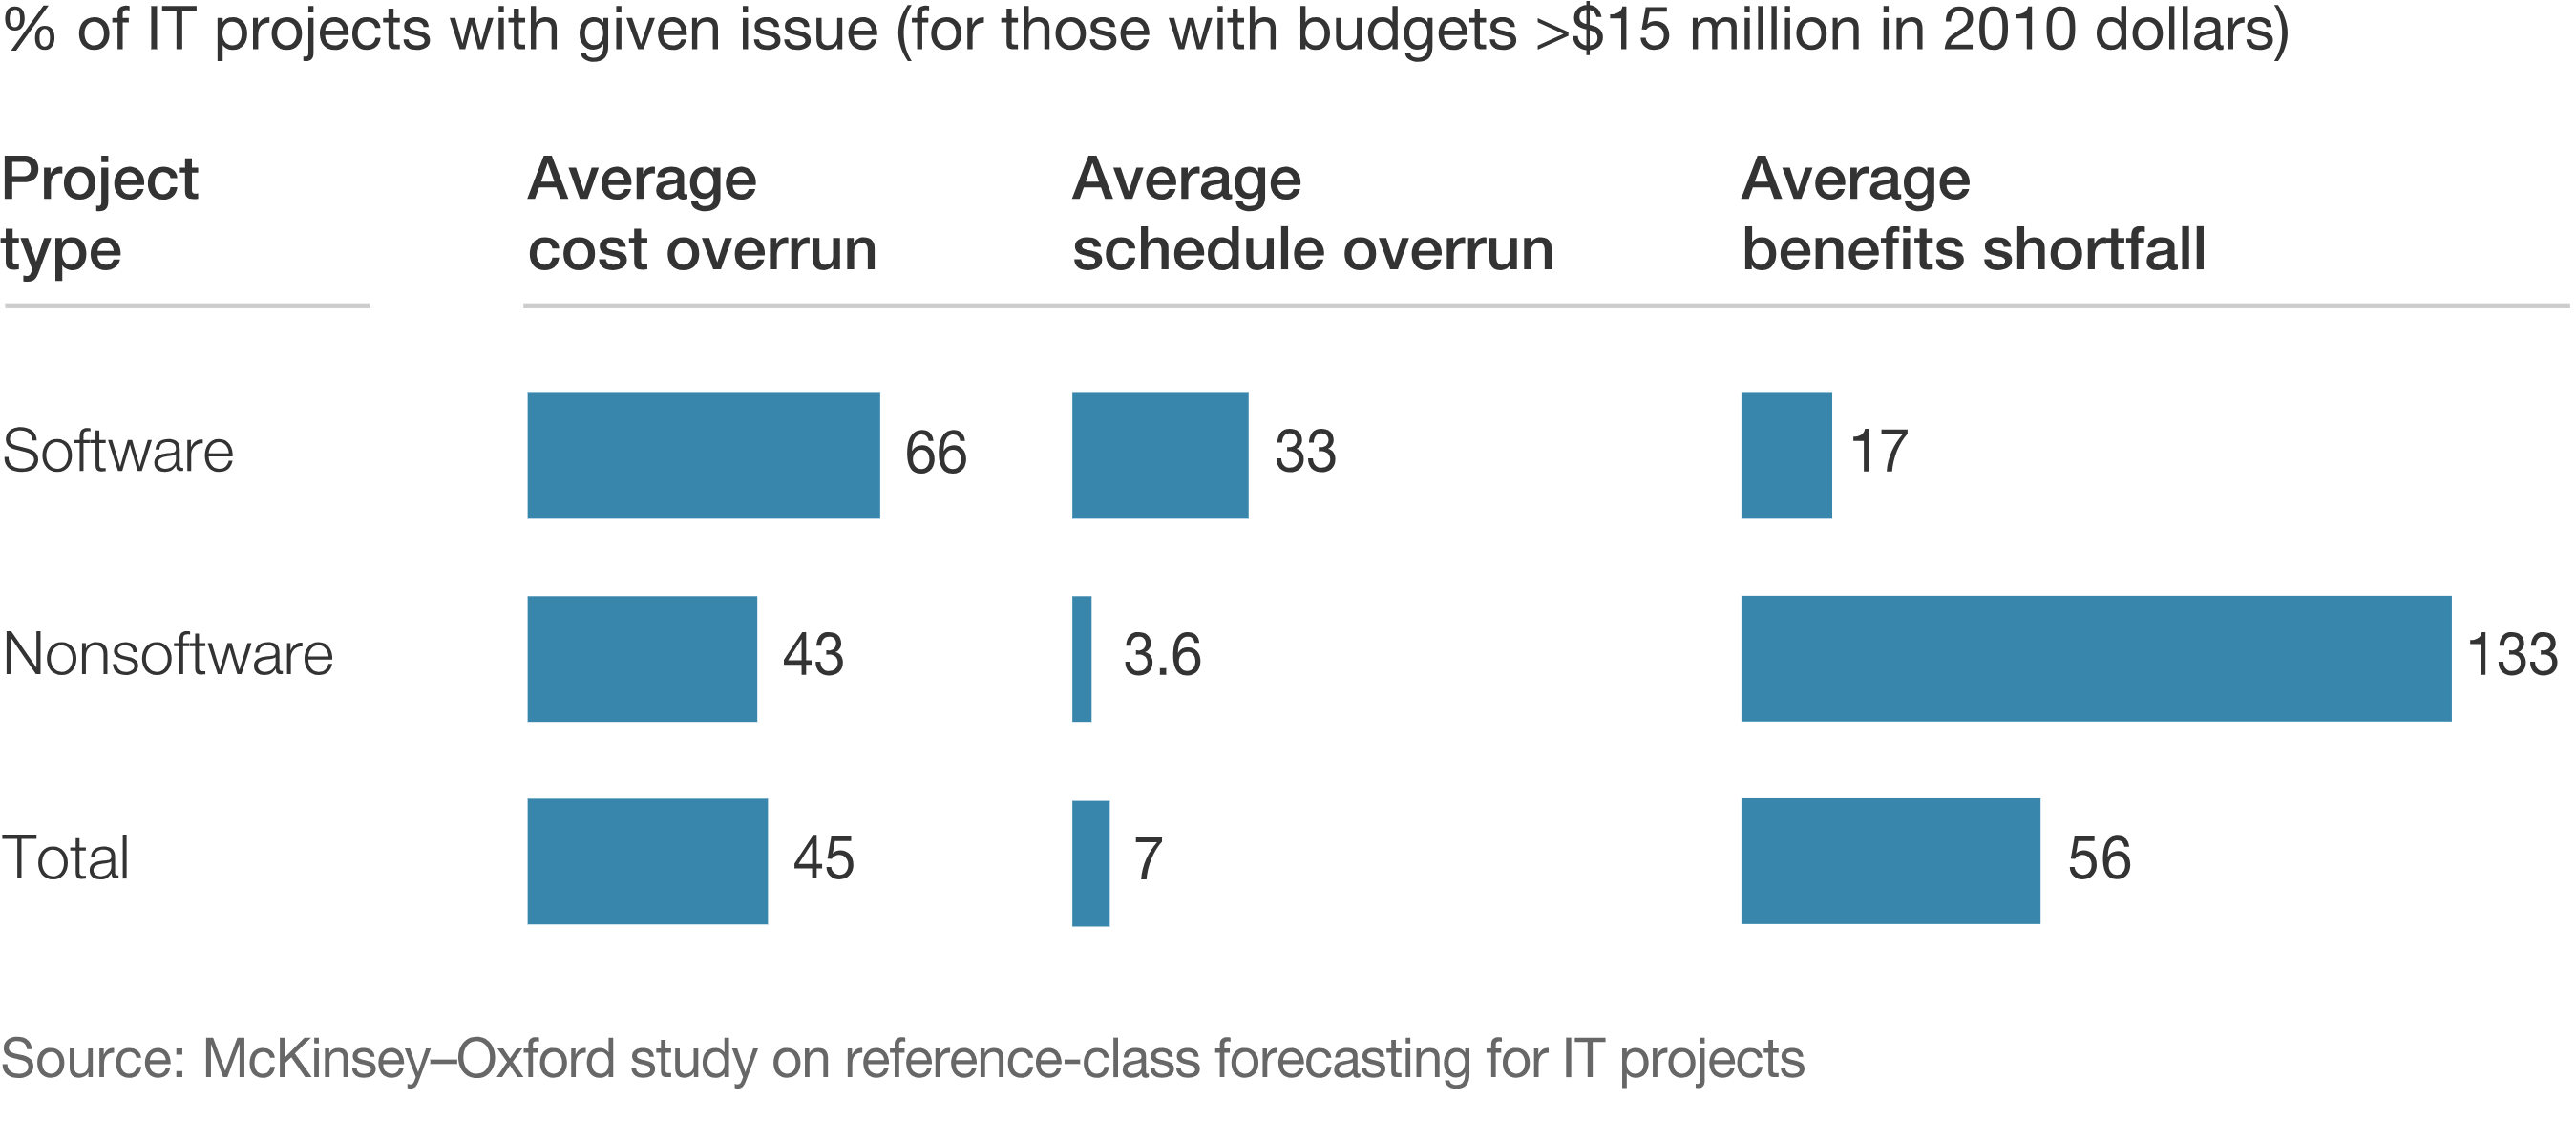 % of IT projects with given issue (for those with budgets >$15 million in 2010 dollars)